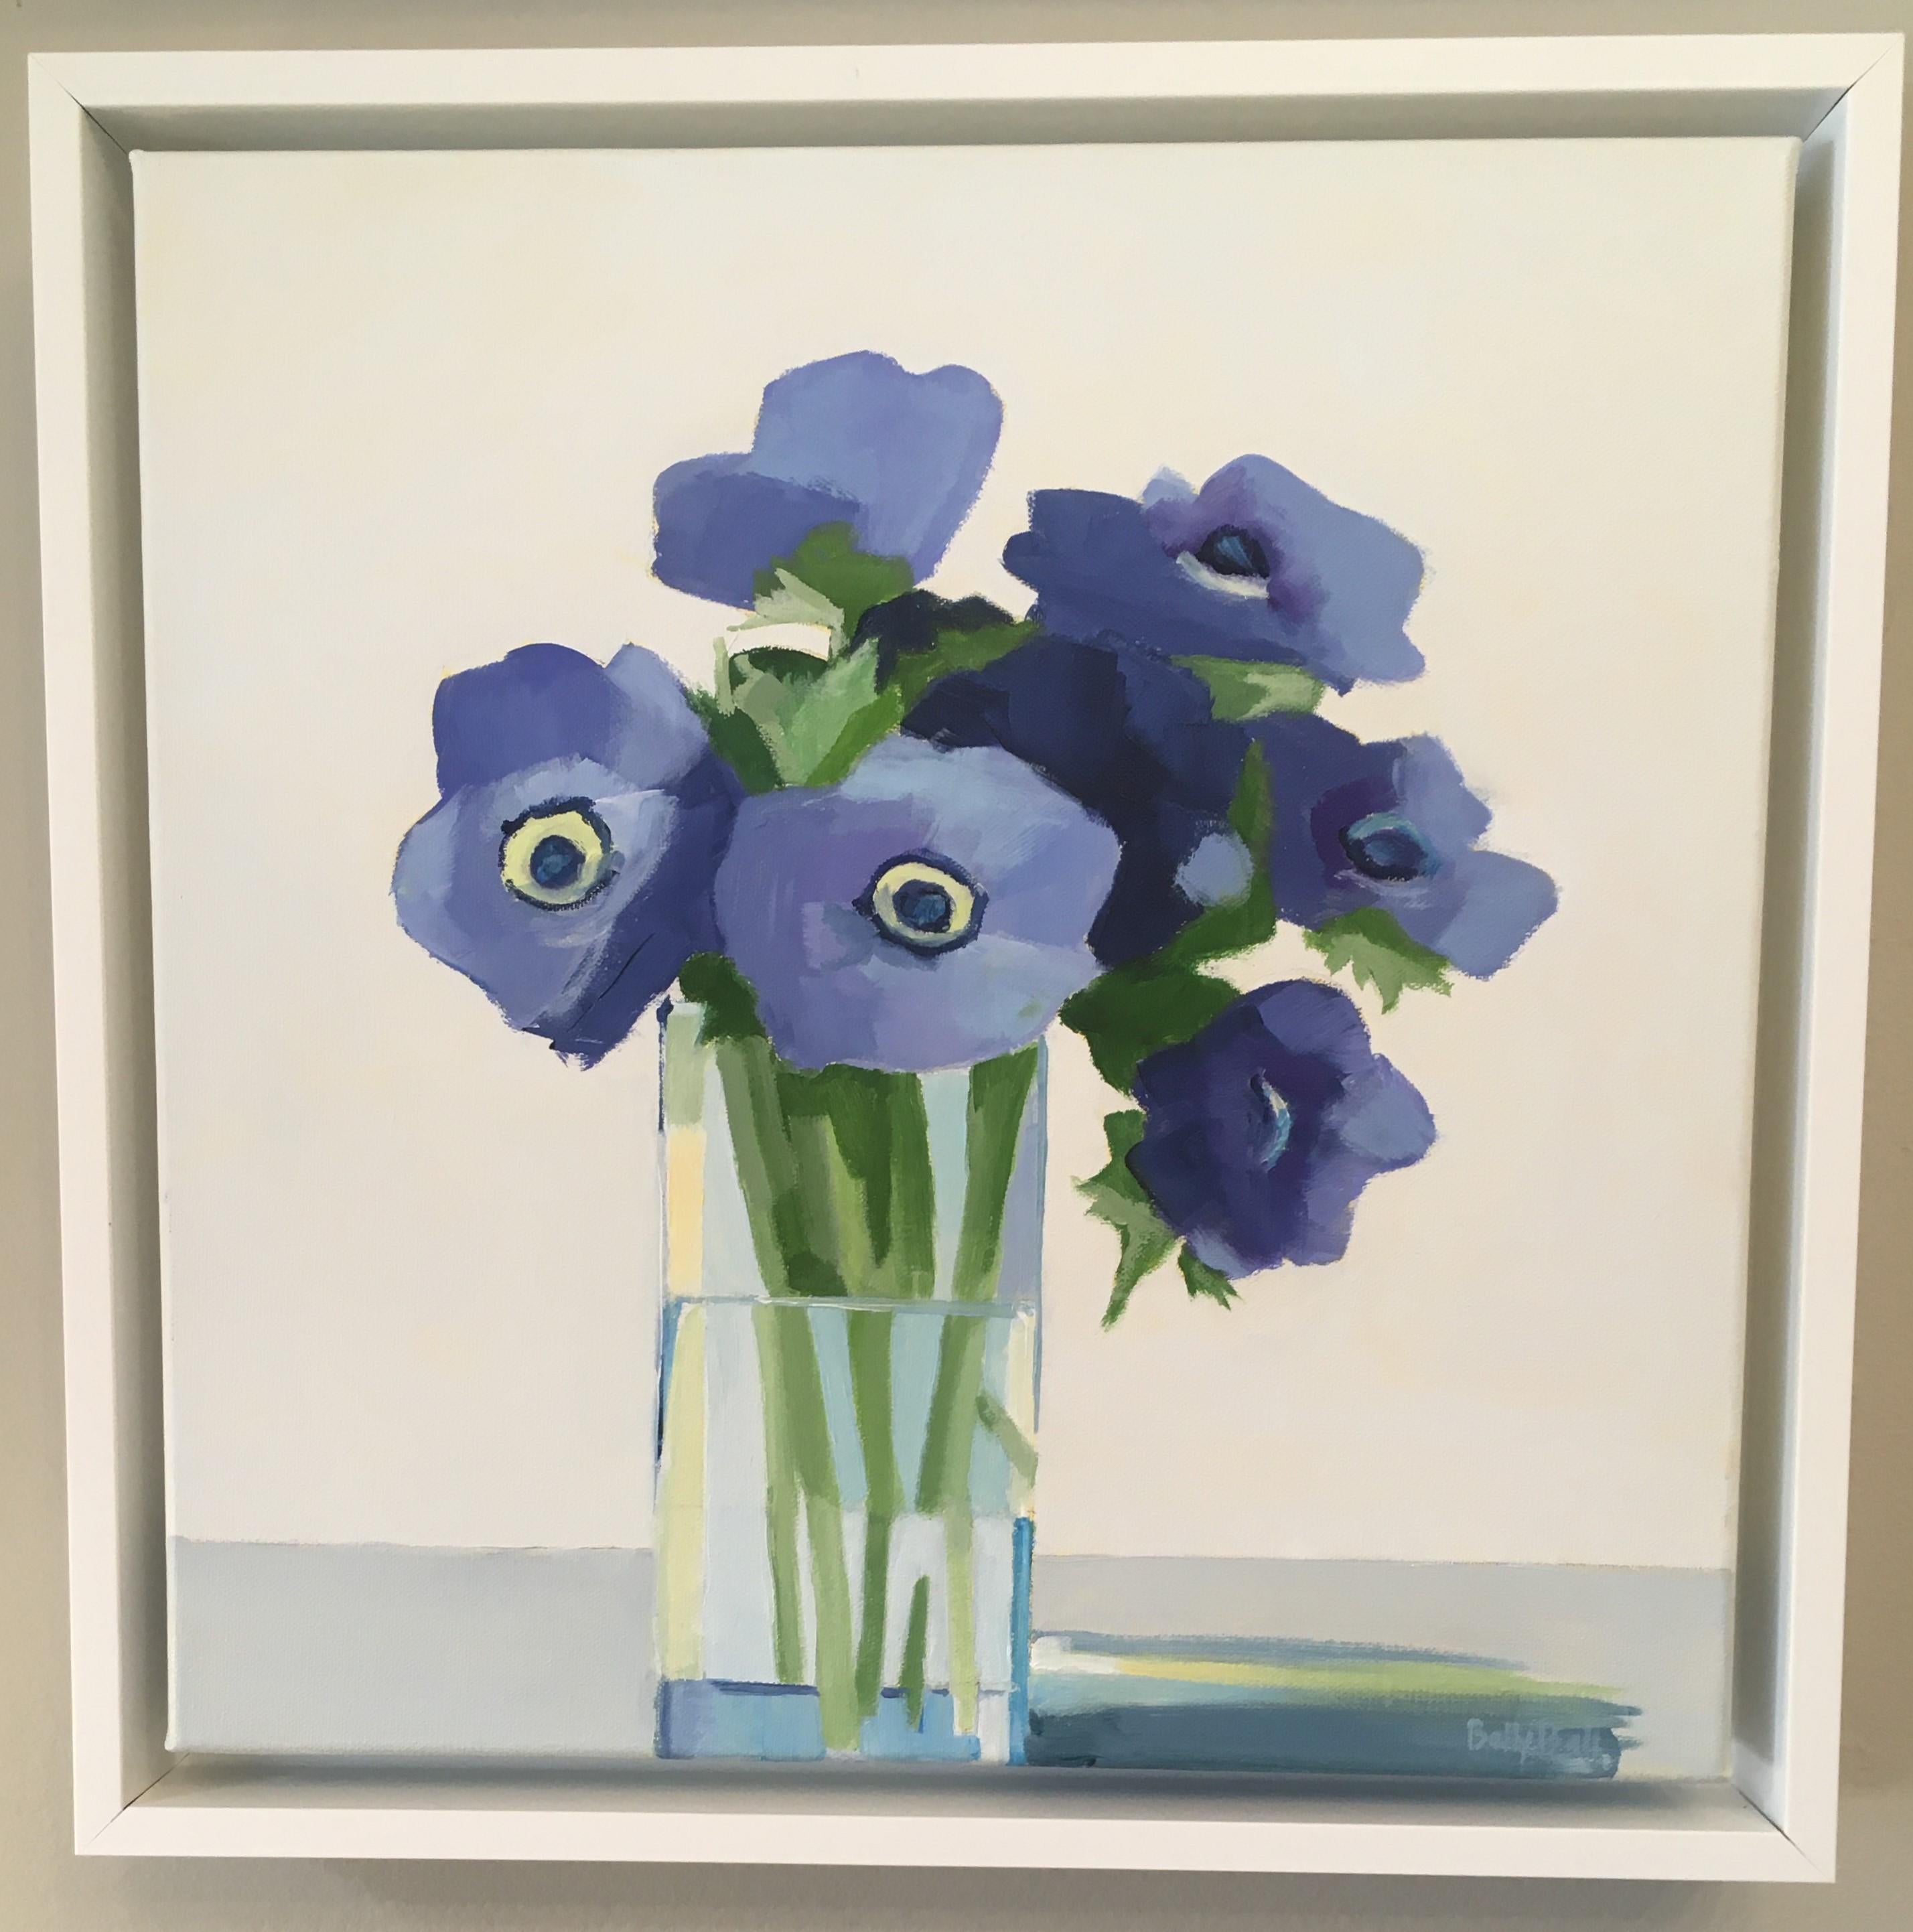 Blue Poppies by Betty Ball is part of her Flower series.  It is Oil on Linen, 12x12.  It is framed to 13.5 x 13.5  It is $875.  It is a beautiful group of flowers in a vase with water.  A perfect Mother's day gift of forever flowers.

Betty Ball